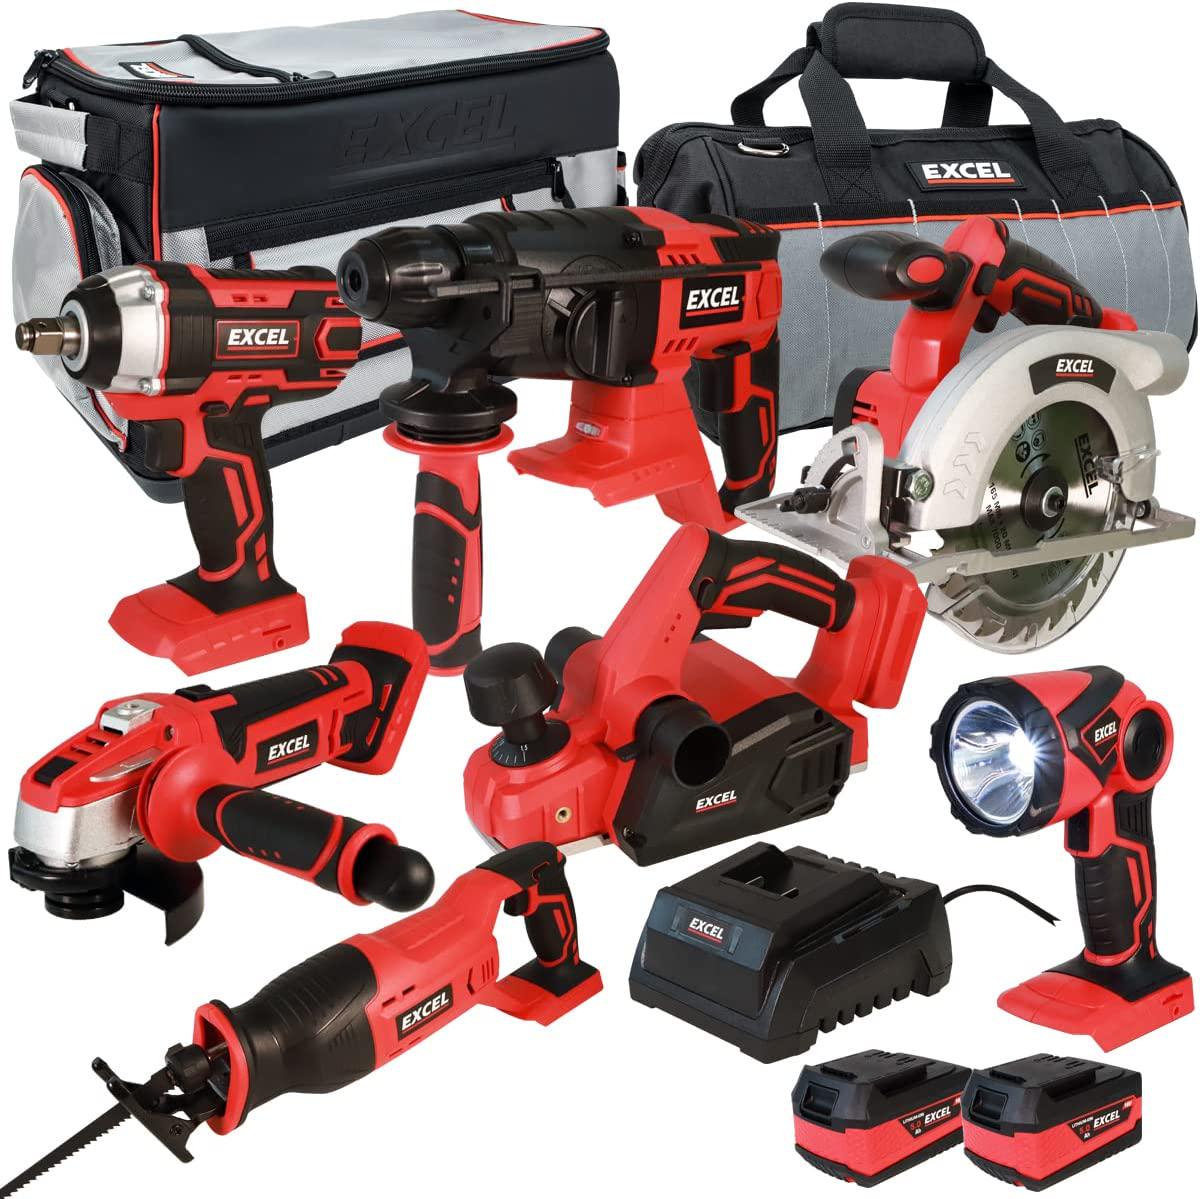 Excel, Excel 18V Cordless 7 Piece Power Tool Kit with 2 x 5.0Ah Batteries and Charger in Bag EXL10206 - Combo Kit - Monster Power Tool Kit - 18V Cordless Power Tool Kits - Mega Power Tool - 7 Piece Tool Kit